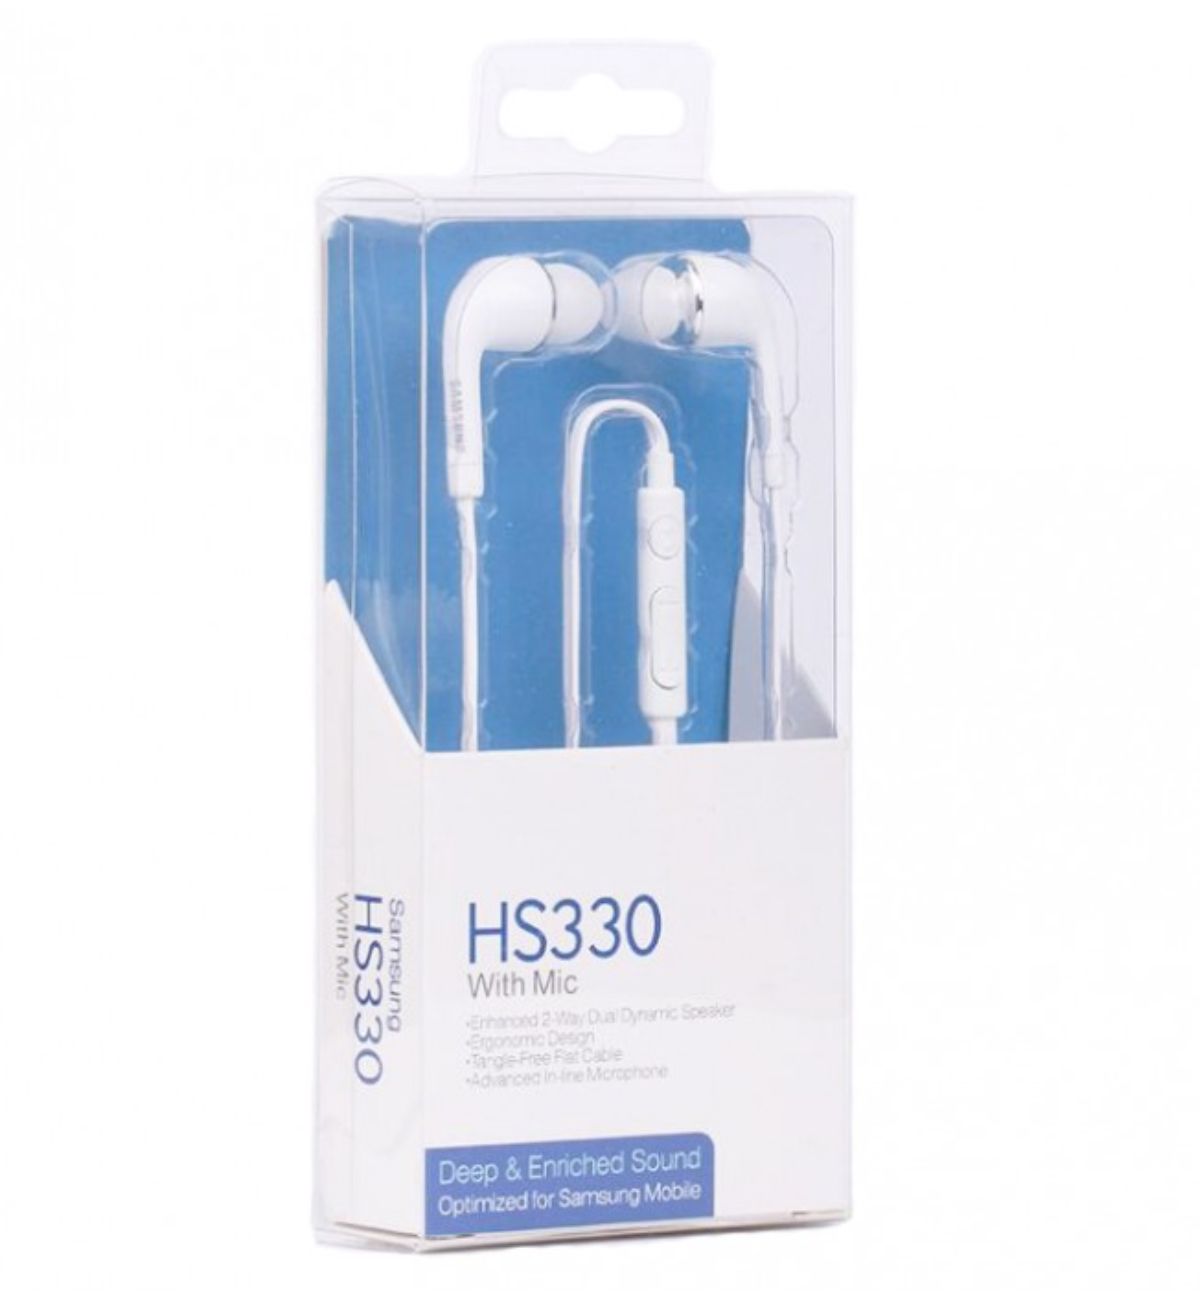 Image of a person wearing Samsung HS330 earphones while commuting, highlighting their comfortable fit and everyday use.